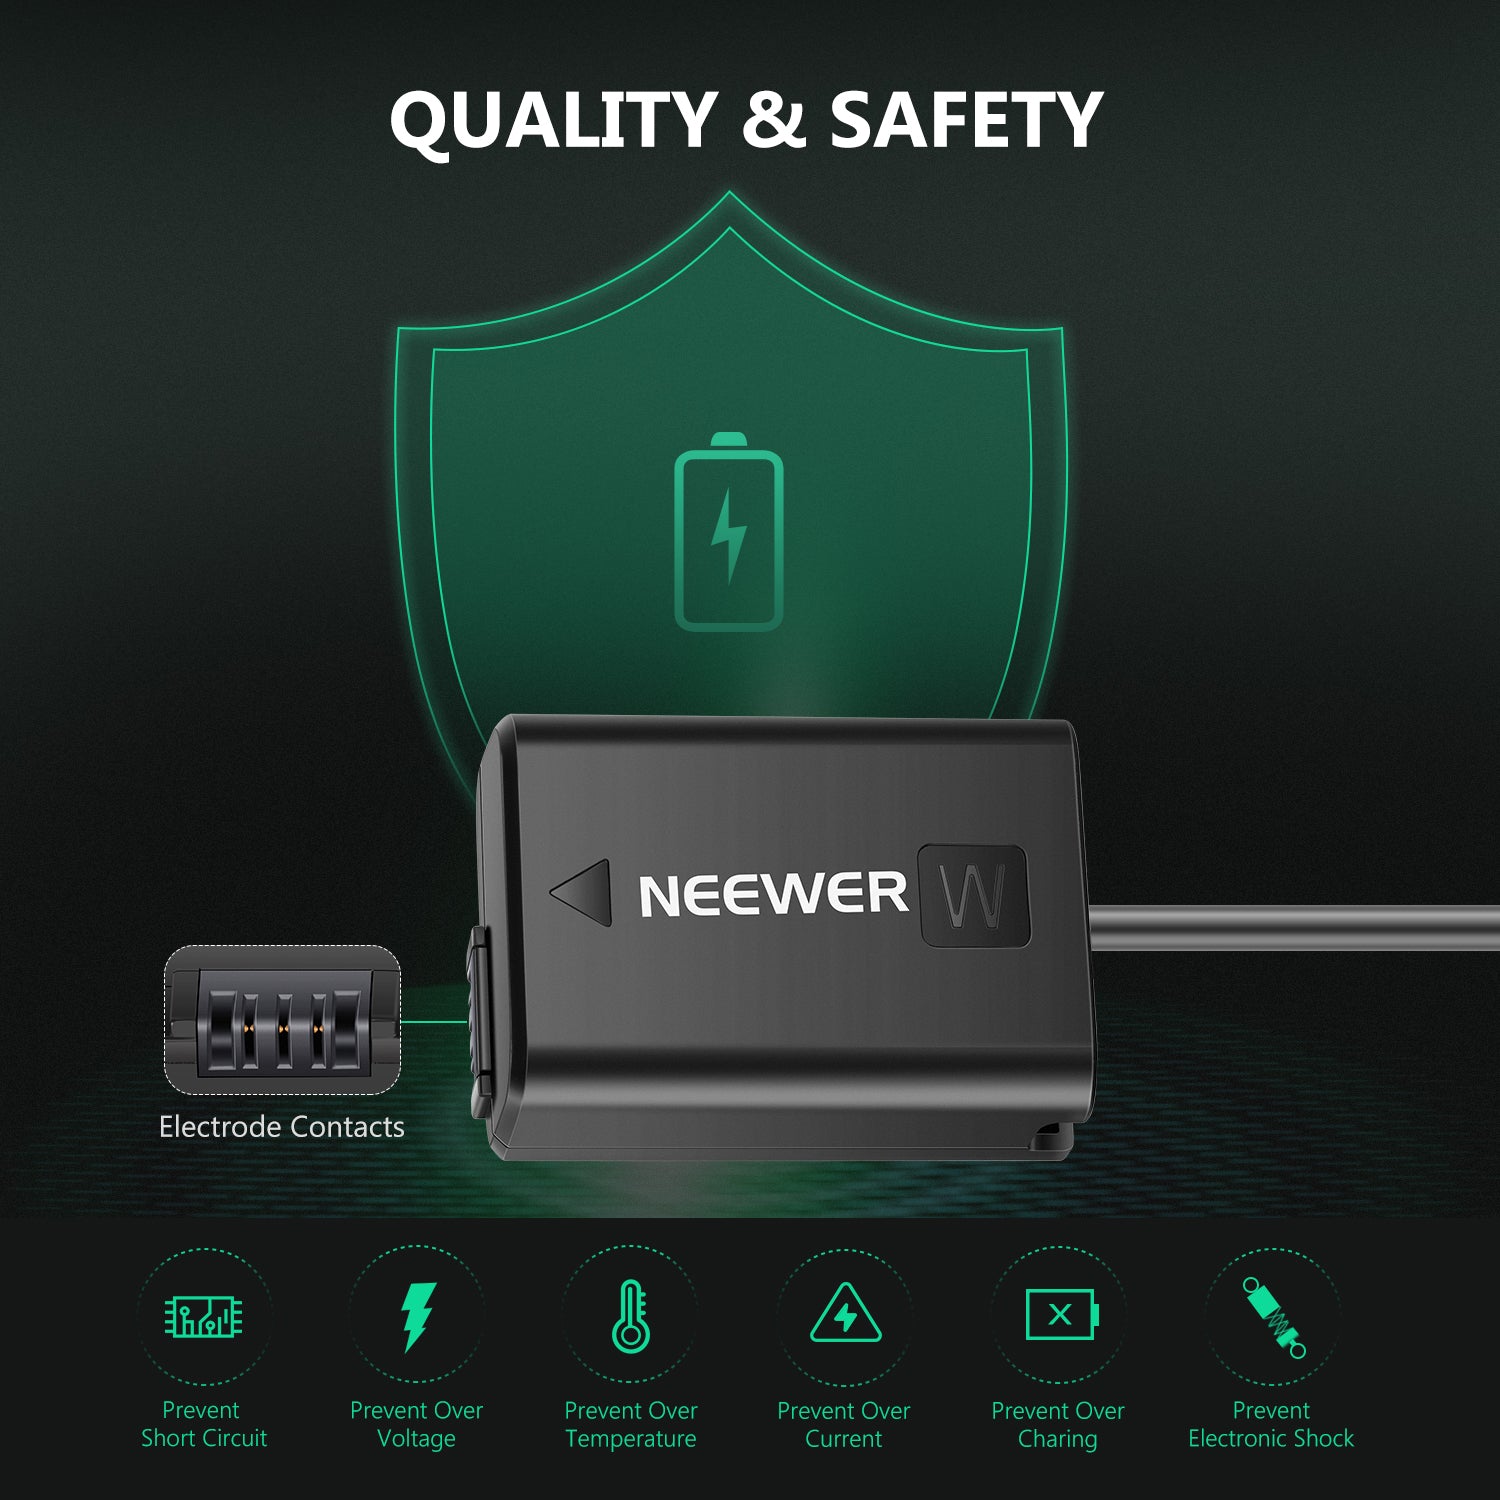 Neewer AC-PW20 AC Power Supply Adapter and DC Coupler Dummy Battery Charger Kit Replace NP-FW50 Battery